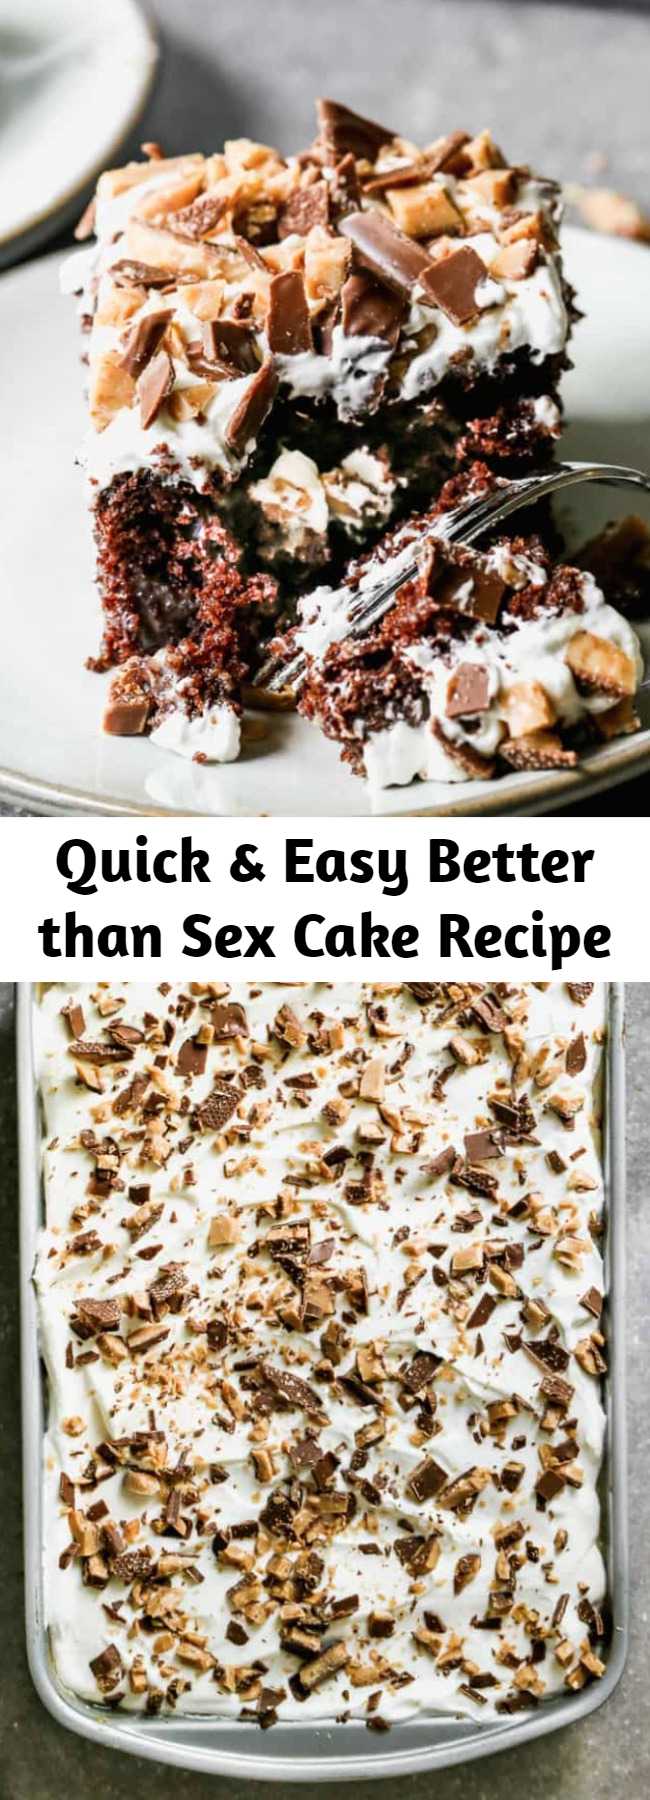 Quick & Easy Better than Sex Cake Recipe - Better than Sex Cake made with chocolate cake soaked in homemade caramel sauce and topped with fresh whipped cream. Whether or not you think it lives up to it’s name, it’s always a crowd favorite!